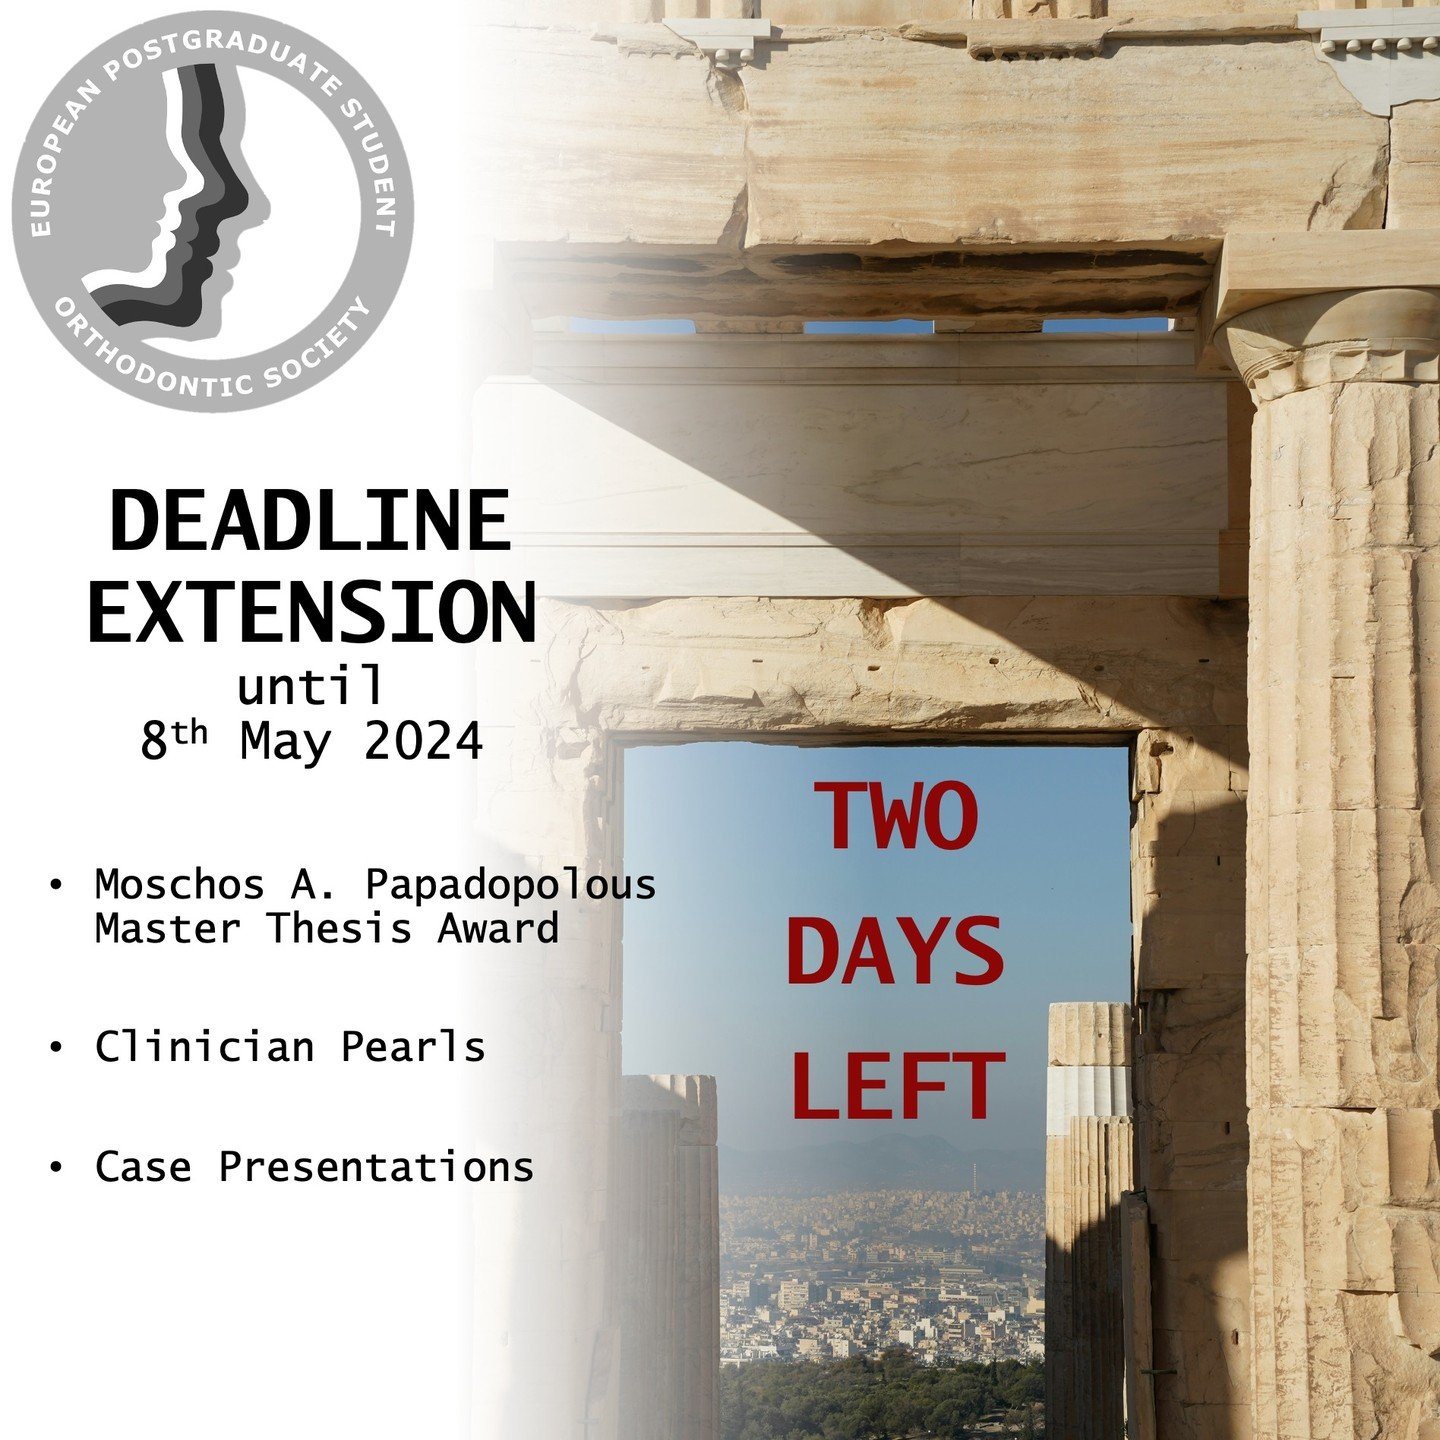 REMINDER: 
Two days remain to submit entries.

Visit www.epsos-ortho.com/events-1/epsos-20th-meeting for more details.